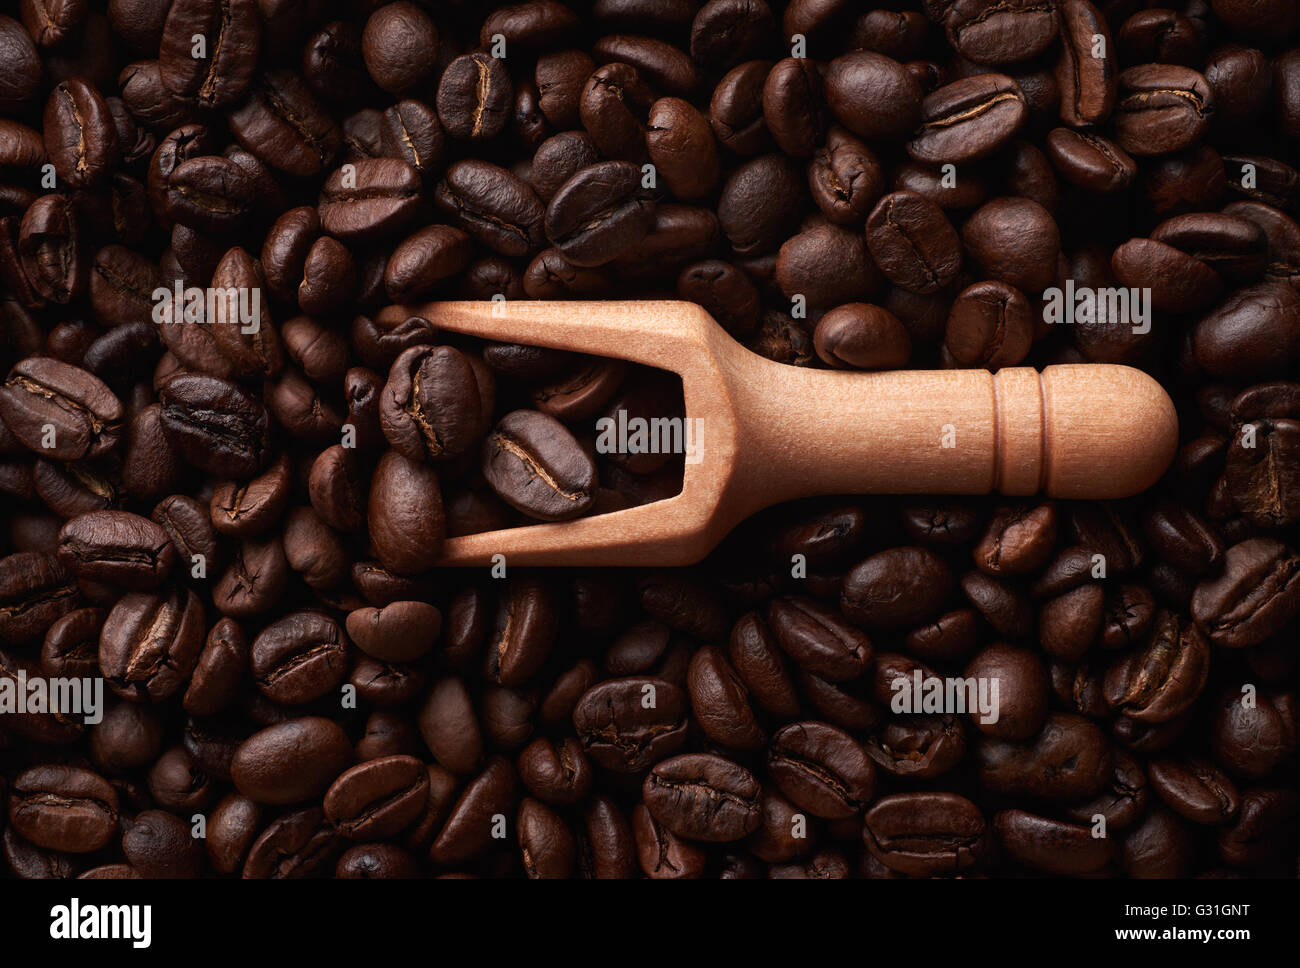 Food ingredients: wooden scoop and dark roasted coffee beans arranged as flat background Stock Photo